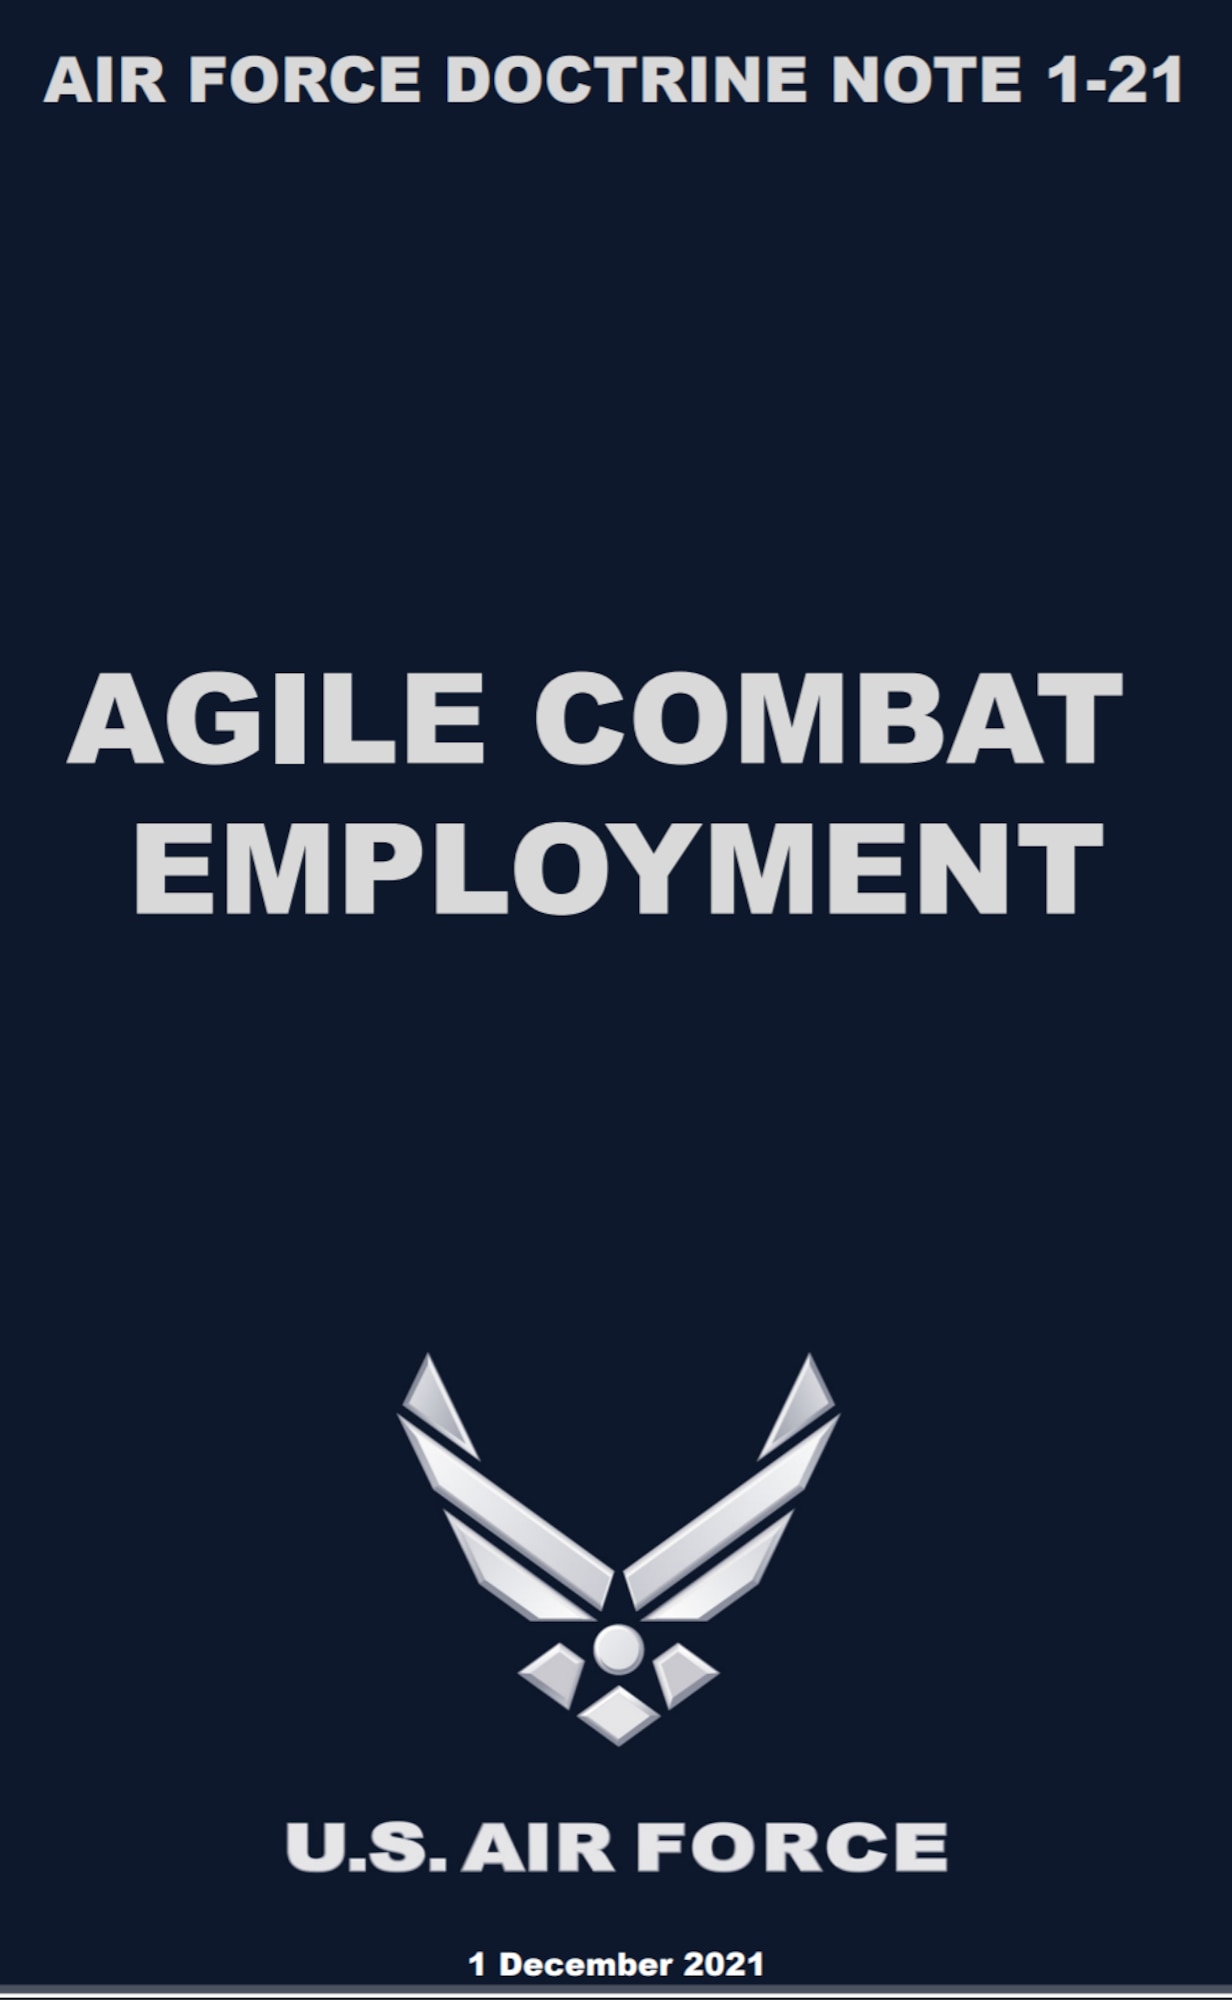 Cover of Air Force Doctrine Note 1-21, Agile Combat Employment dated 1 Dec. 2021. (U.S. Air Force illustration by Tech. Sgt. Jennifer Stai)